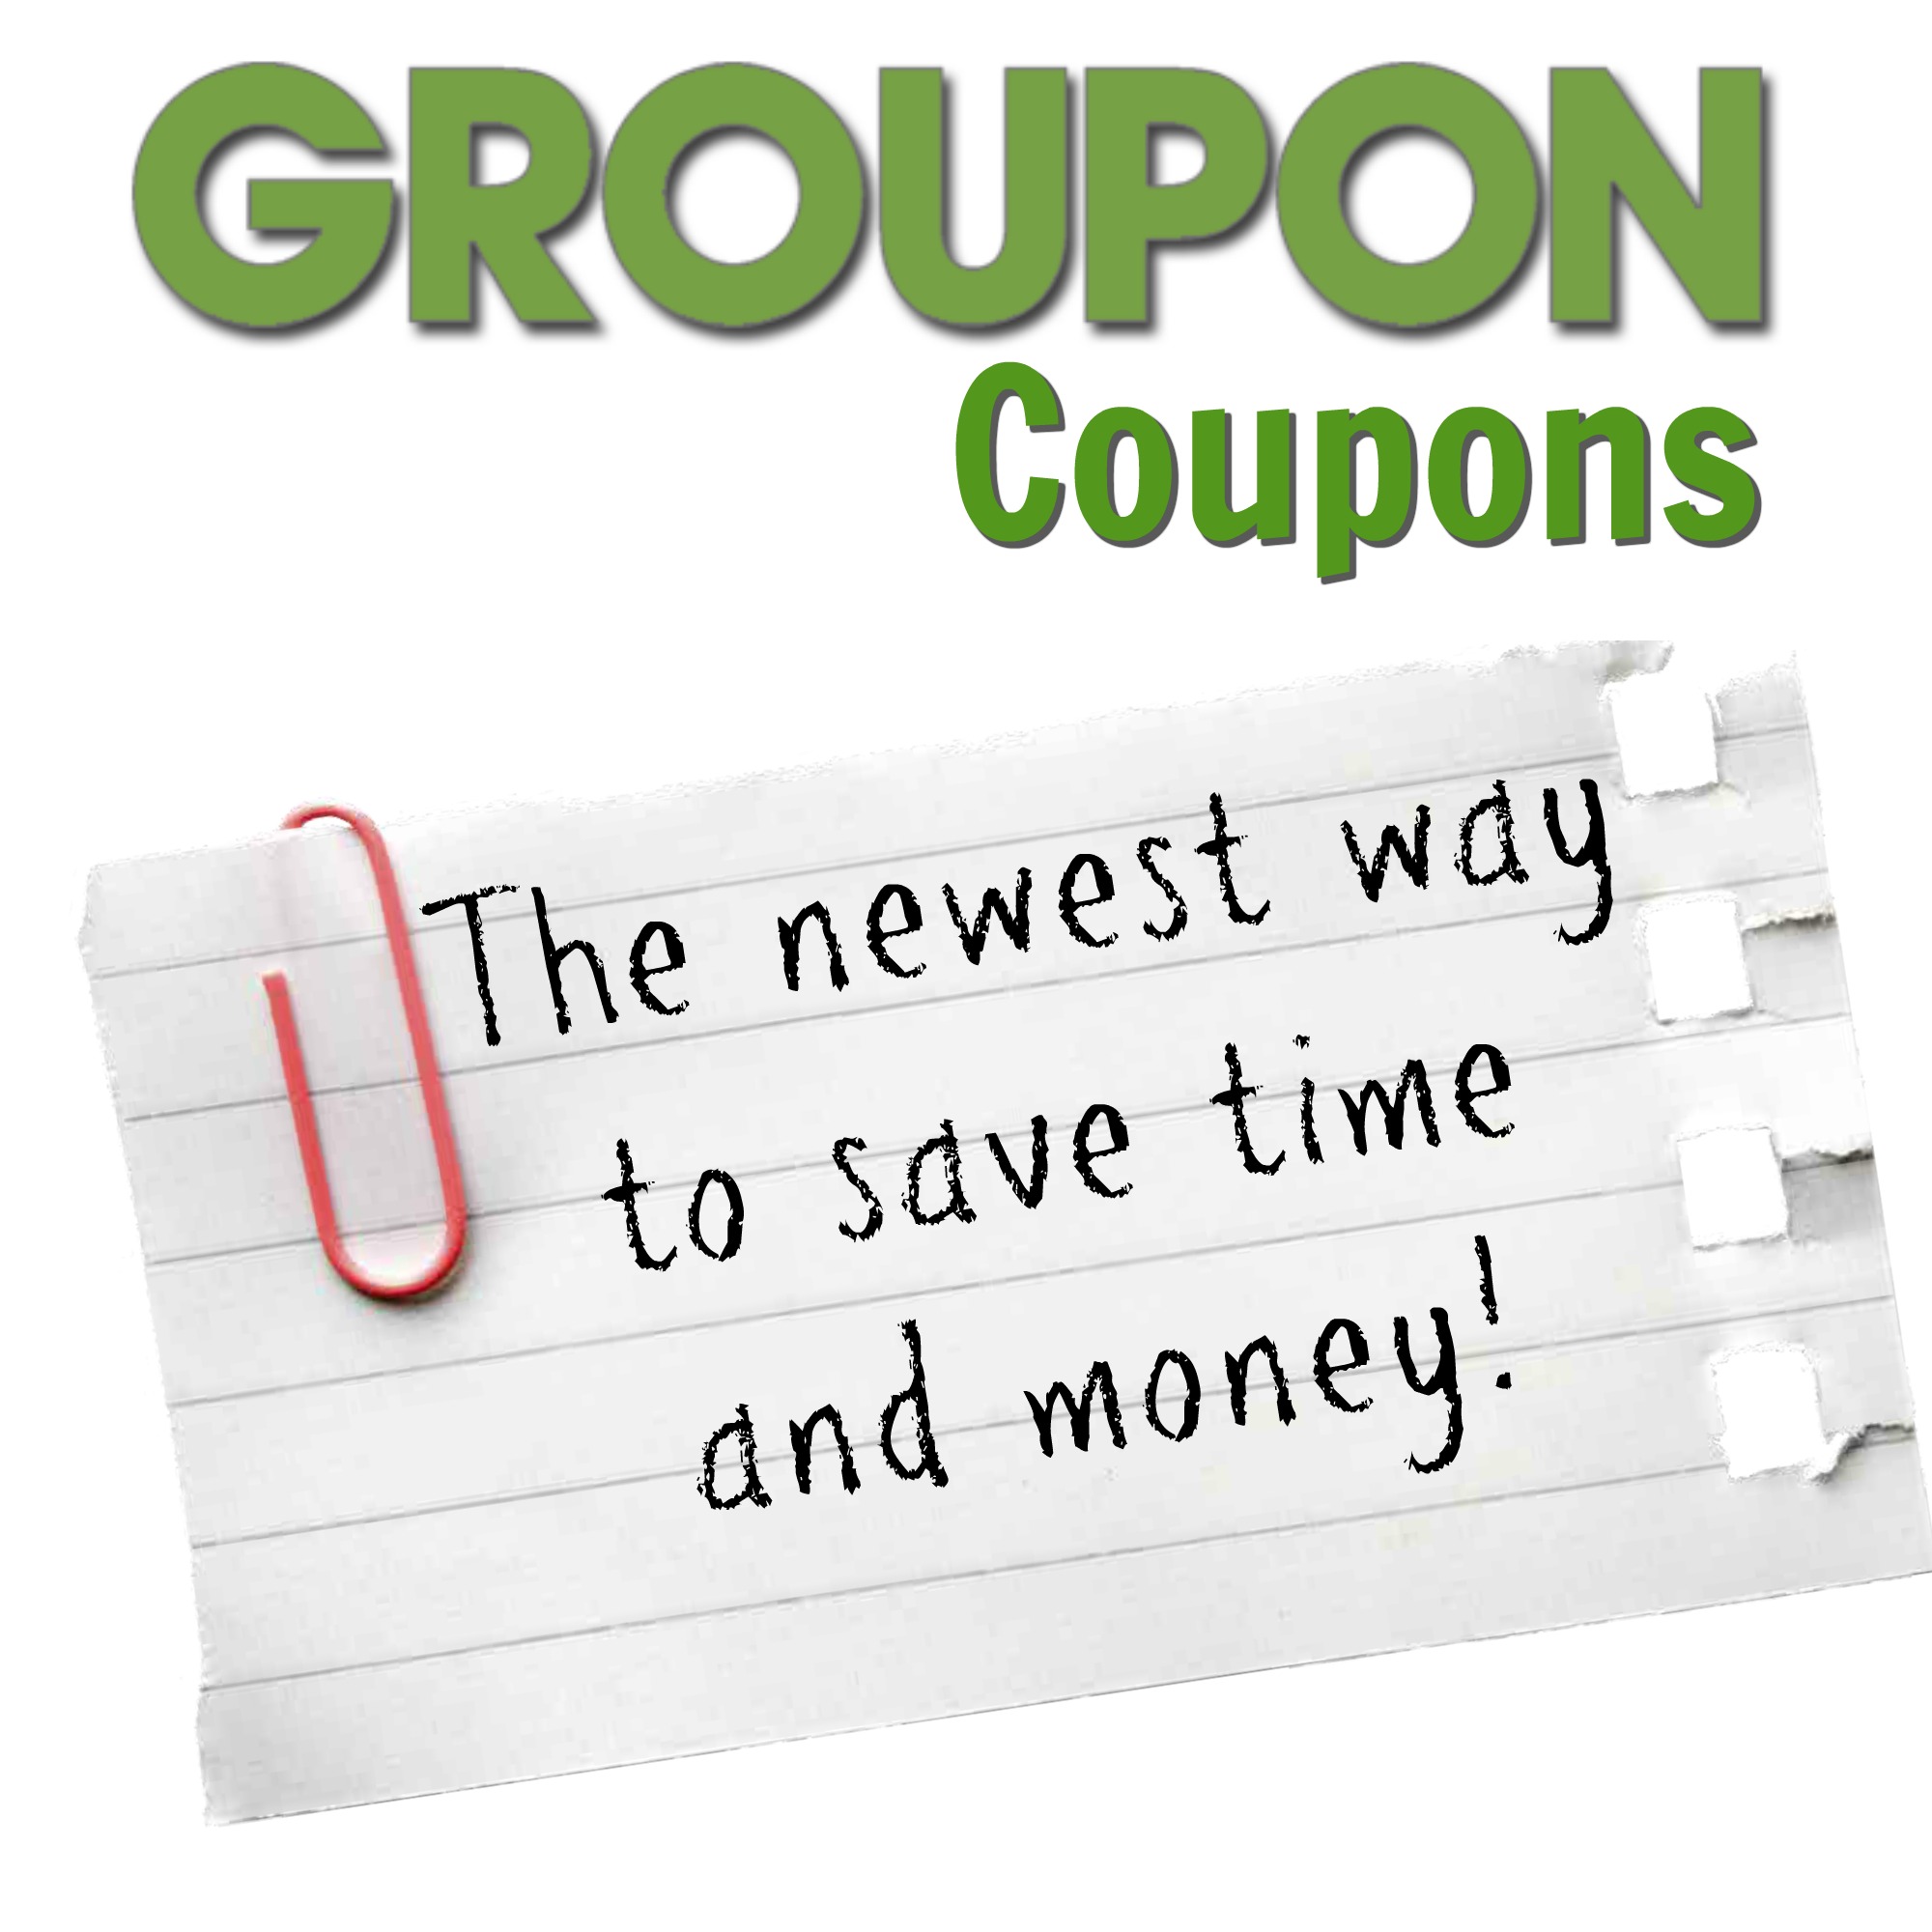 groupon-coupons-the-newest-way-to-save-time-and-money